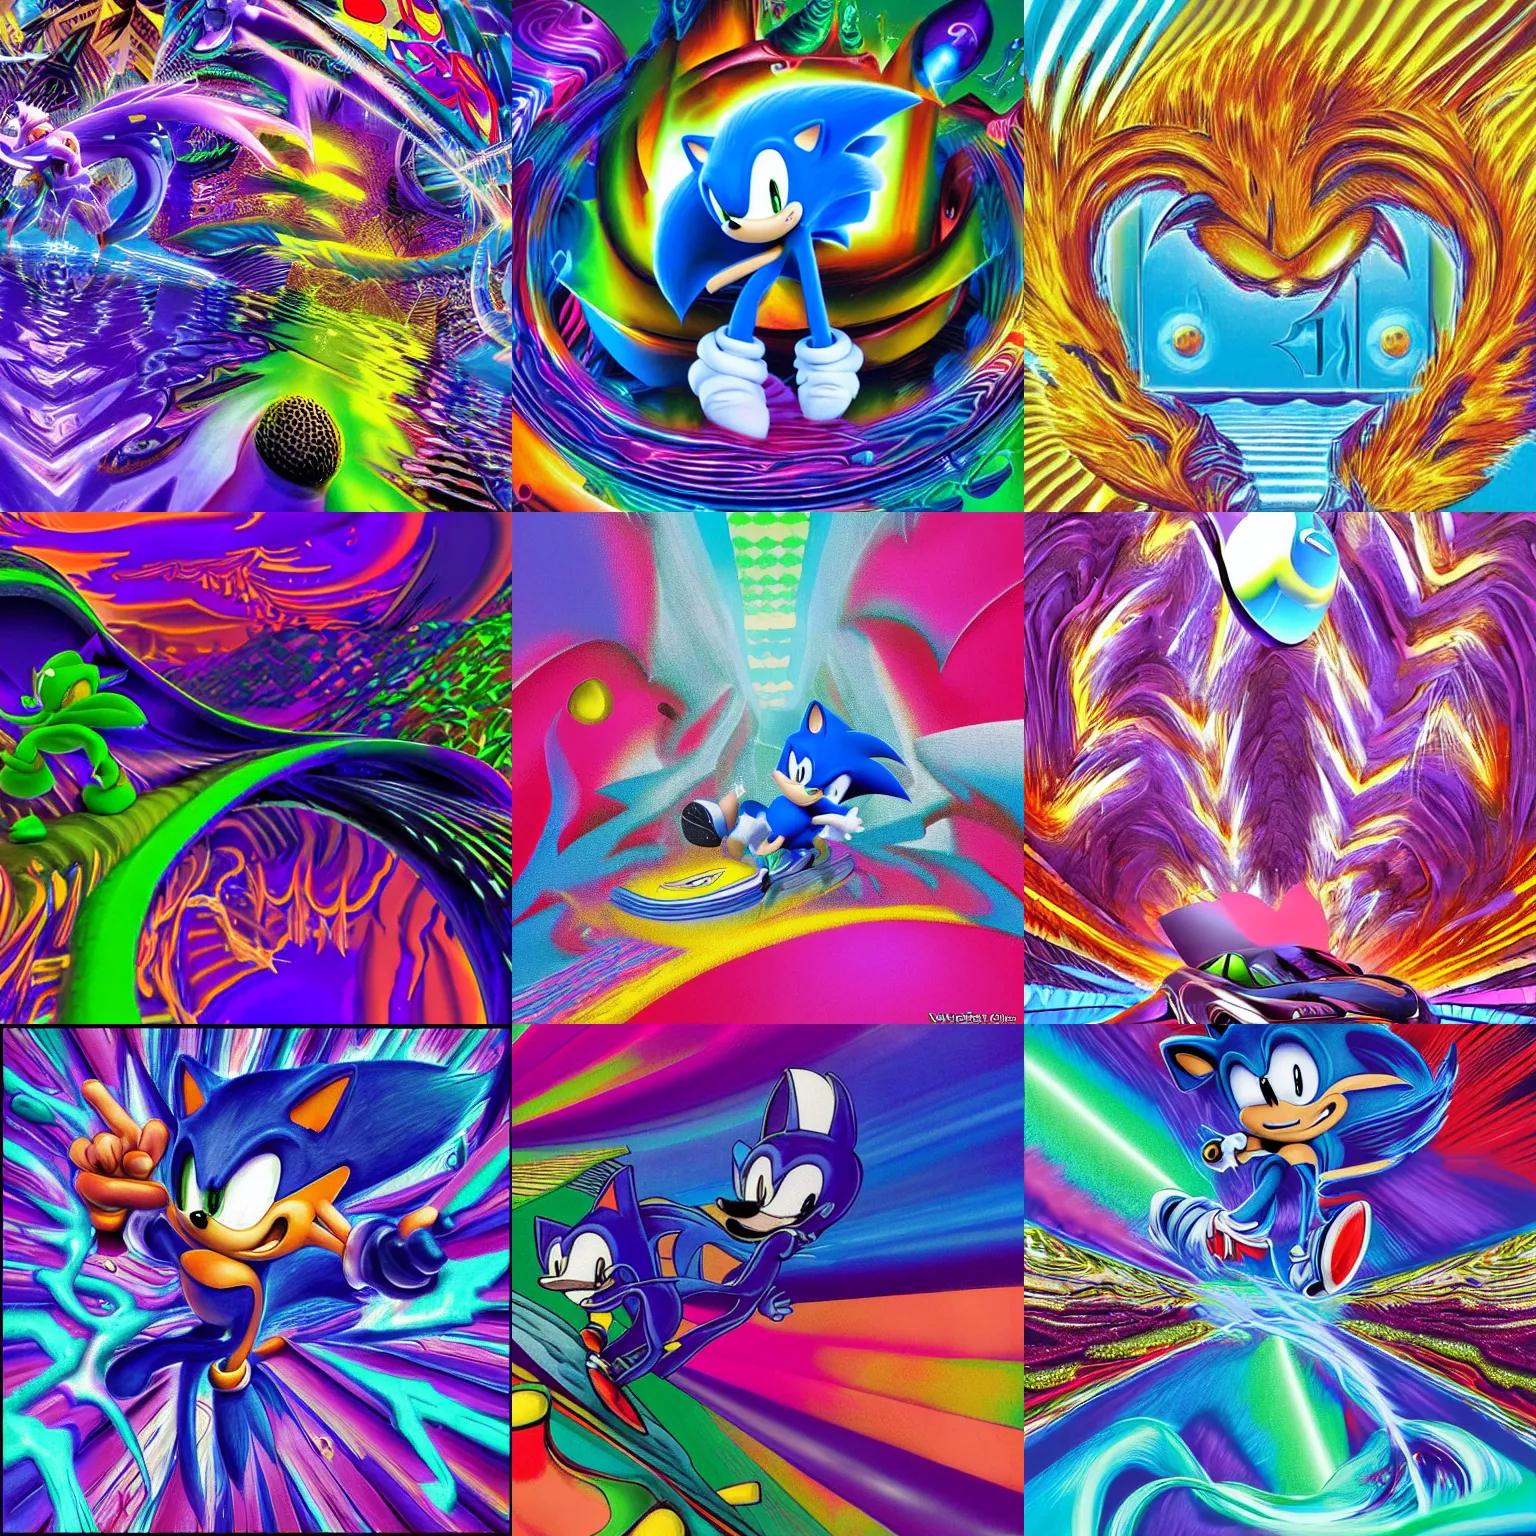 Prompt: sonic closeup of surreal, sharp, detailed professional, high quality airbrush art MGMT album cover of a liquid dissolving LSD DMT sonic the hedgehog surfing through liquid mirror tunnels, purple checkerboard background, 1990s 1992 Sega Genesis video game album cover